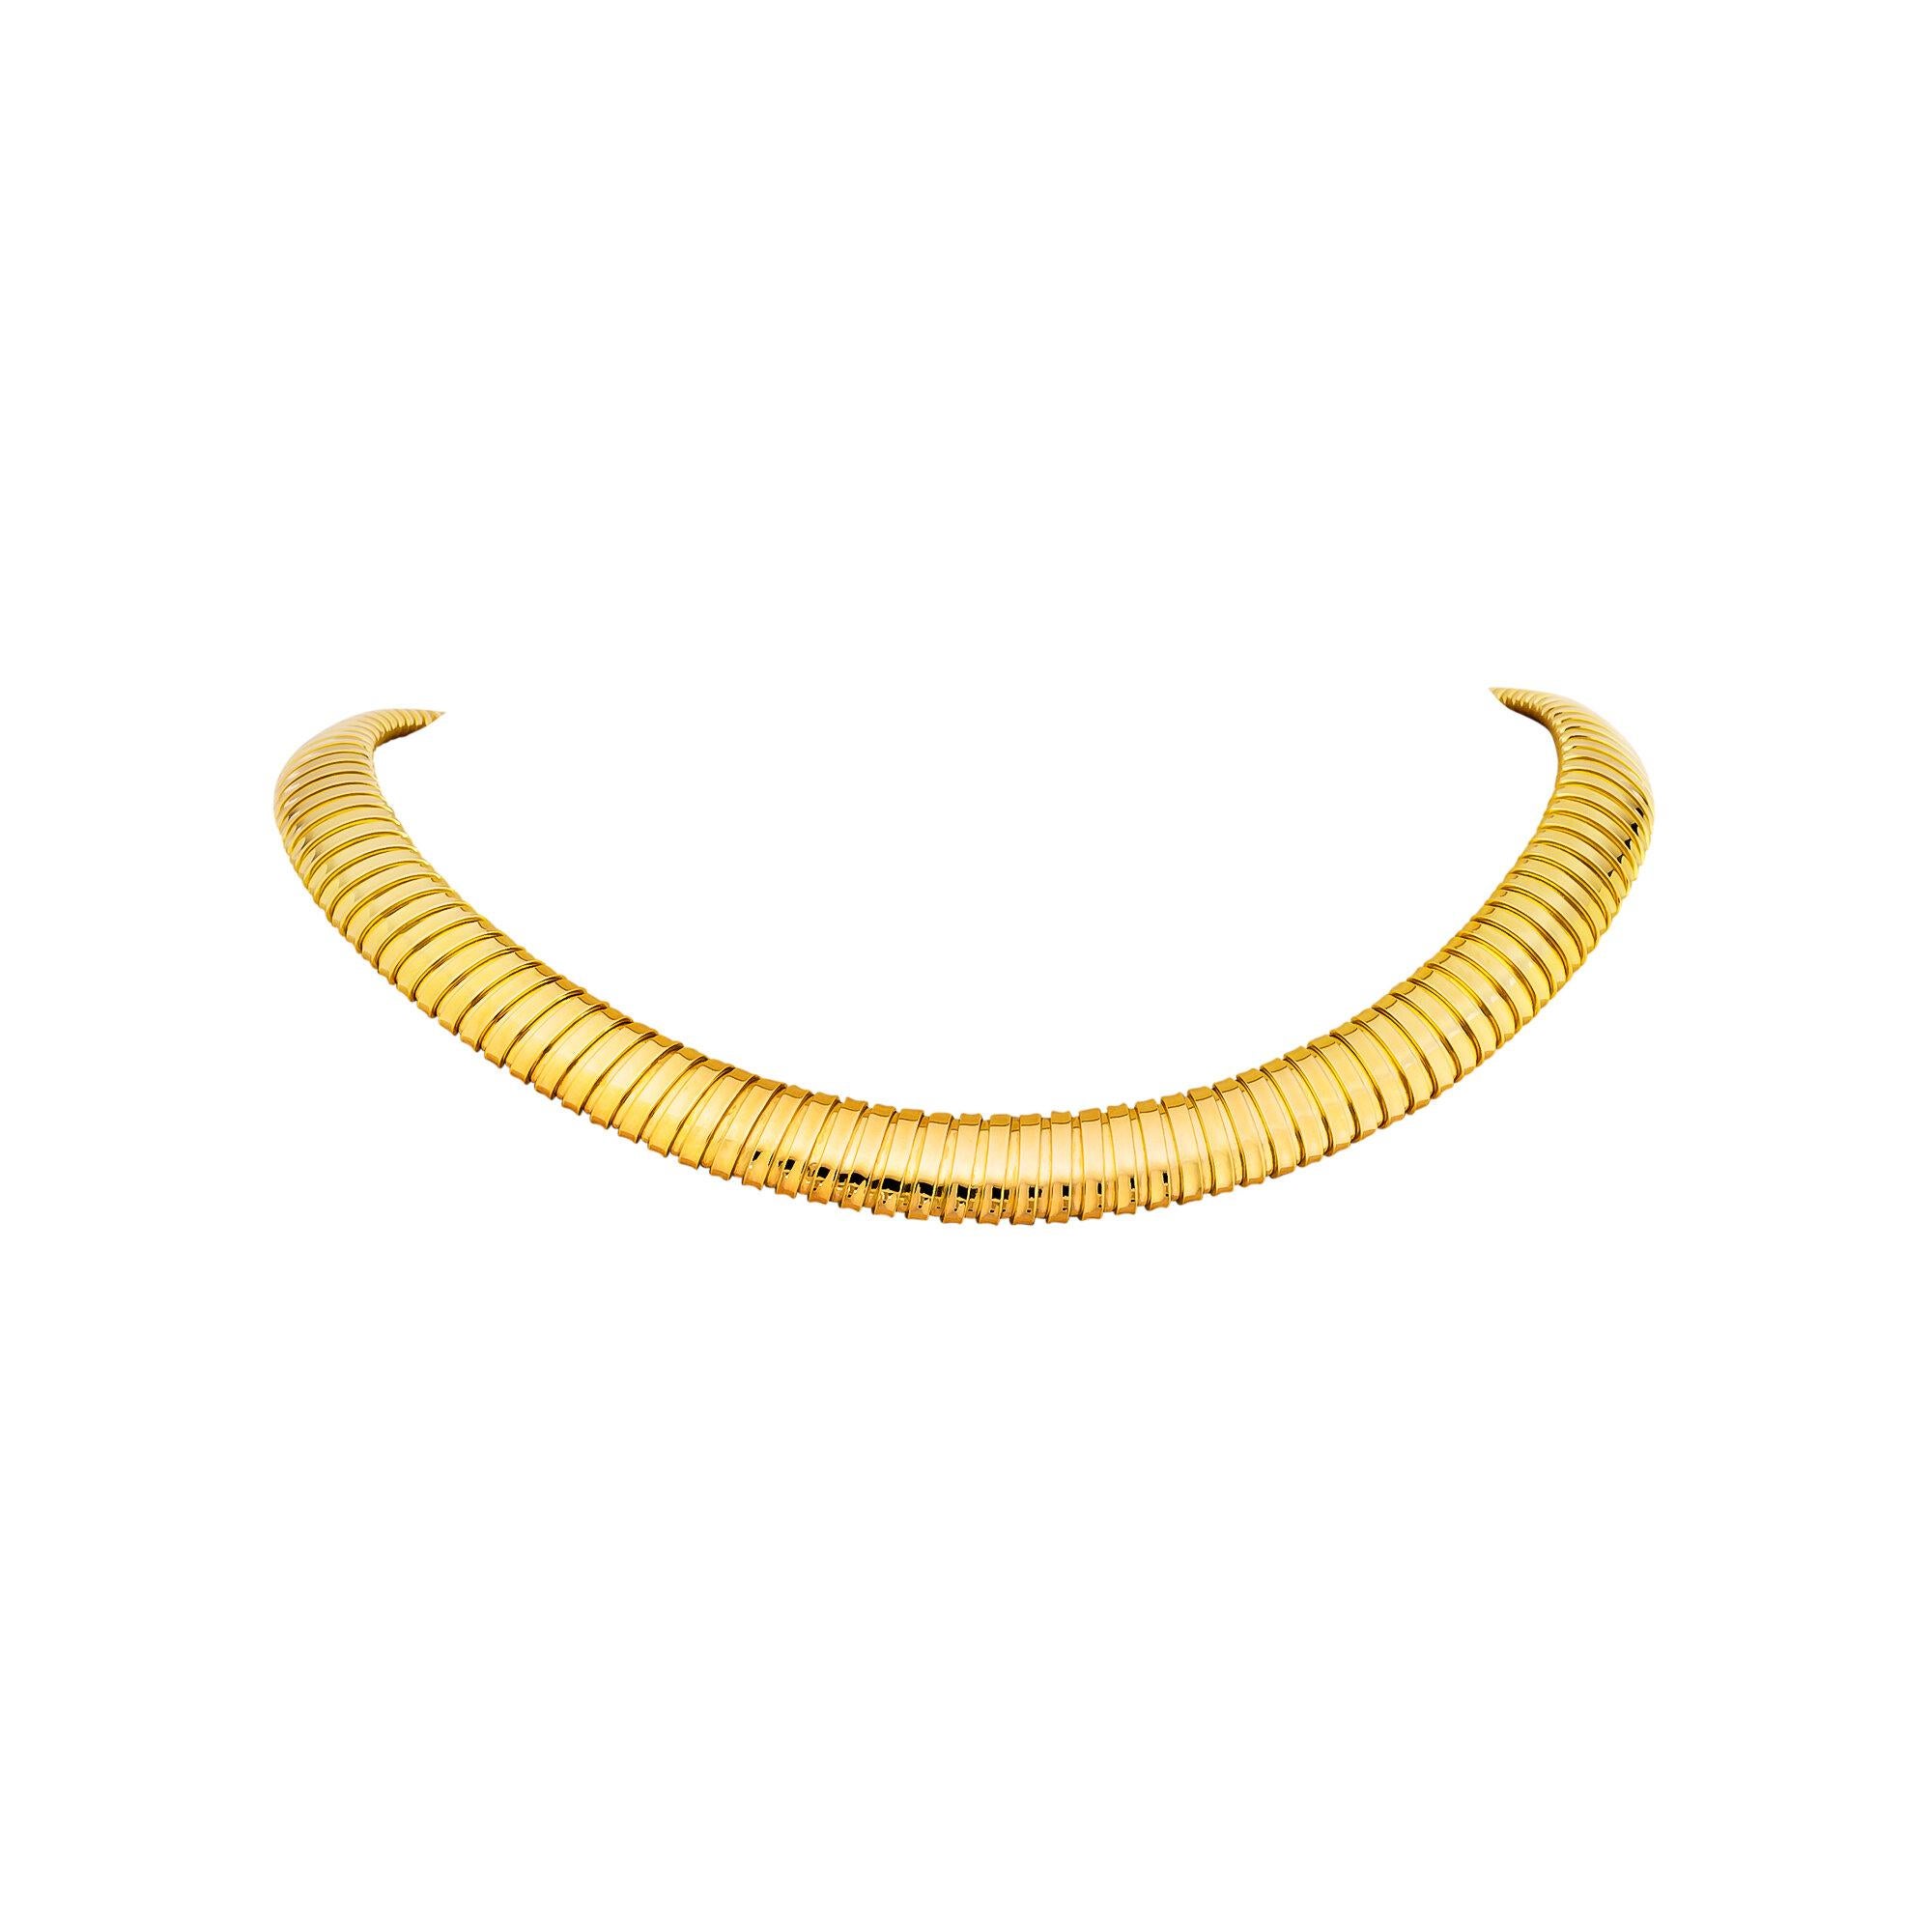 When only just the right amount of gold will do, this clean, sleek, and timeless handmade tubogas necklace will fit the bill. With a striking yet minimalist presence, this 18 karat yellow gold flexible necklace will quickly become your go-to